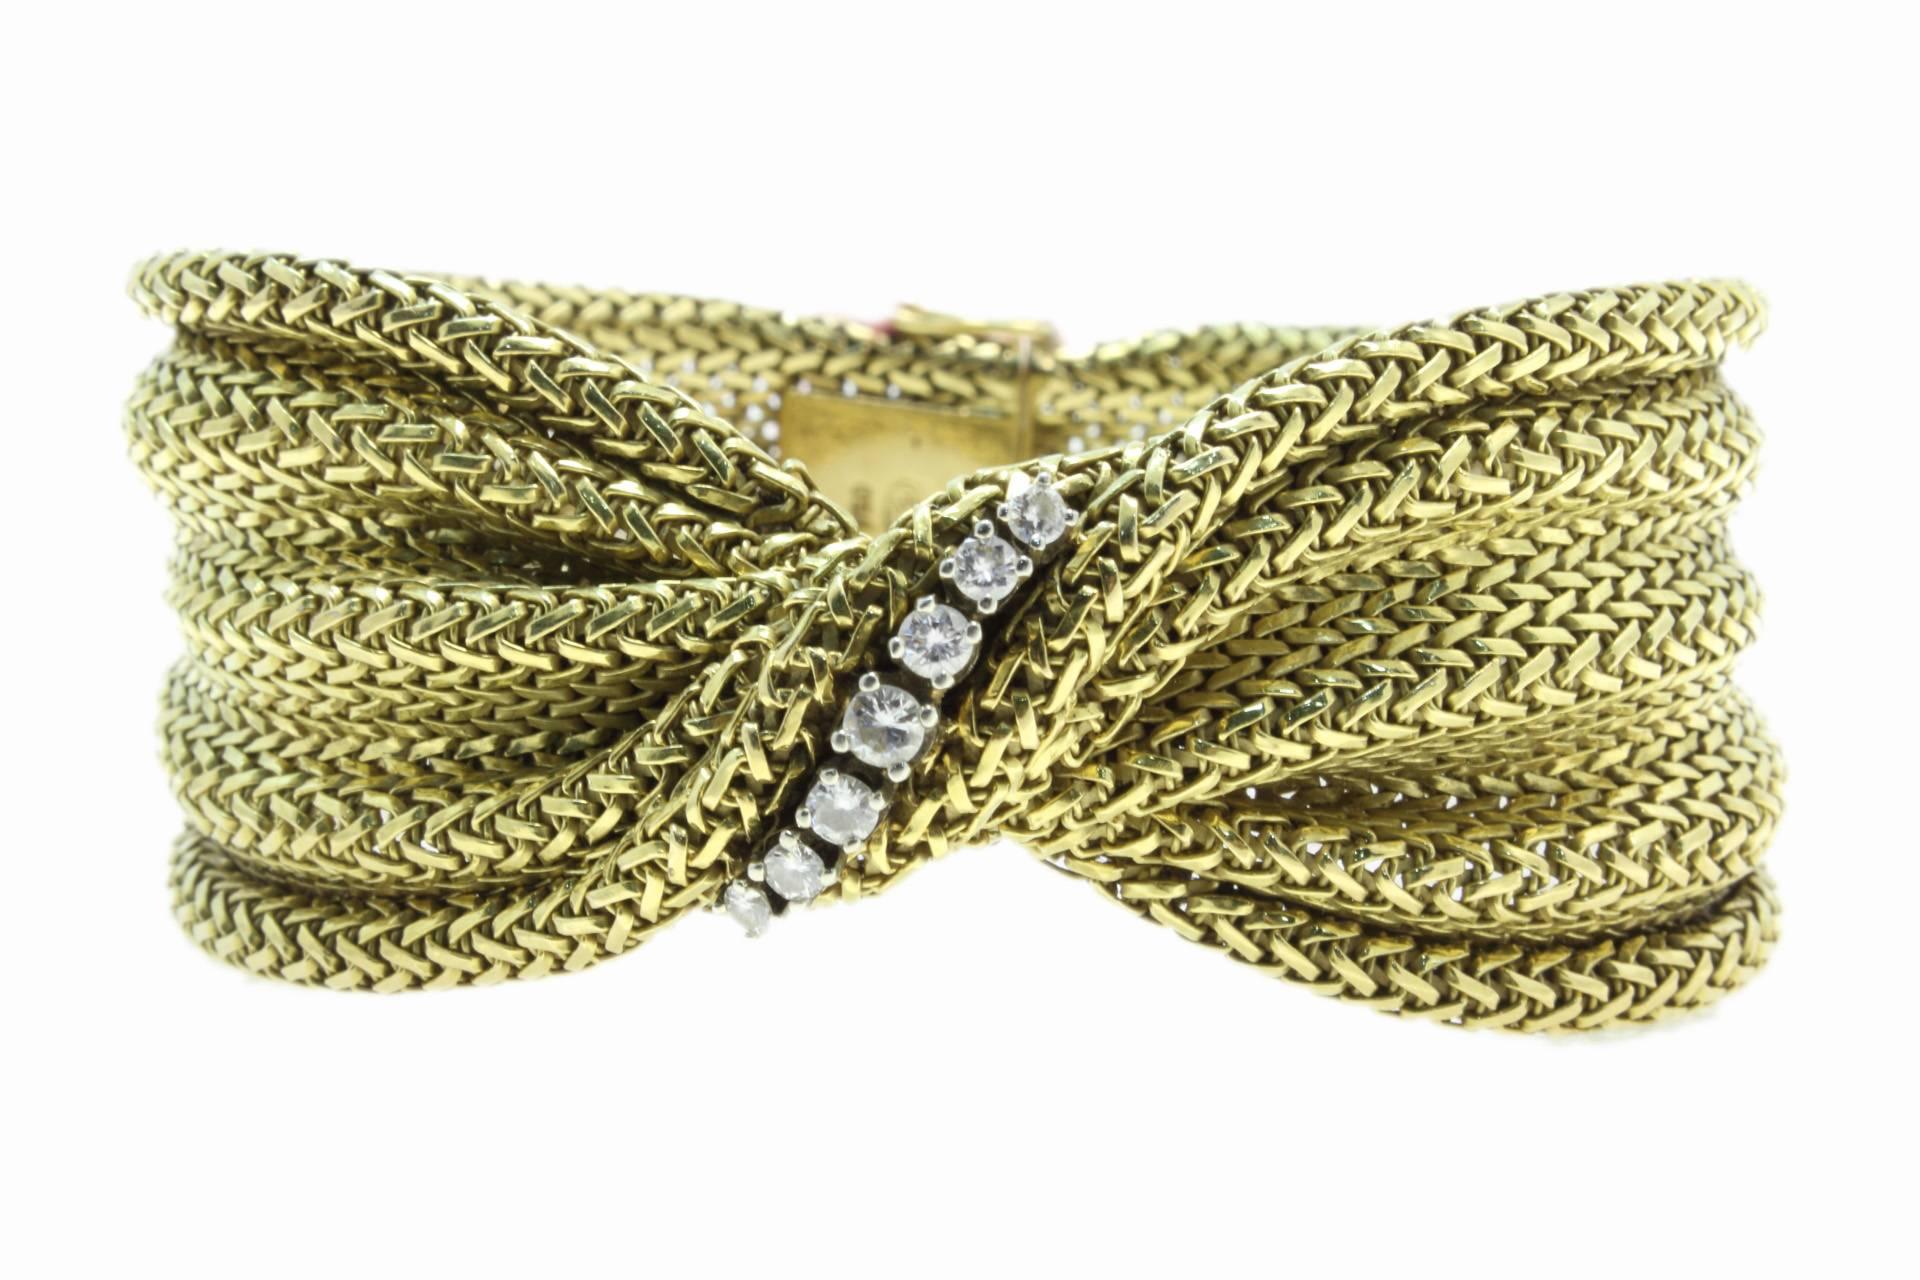 Retro bracelet mounted in 18 Kt yellow gold and a twist of diamonds in the middle of it.
Tot weight 71.04 g
Diamonds 0.37 ct

Rf. gofgc